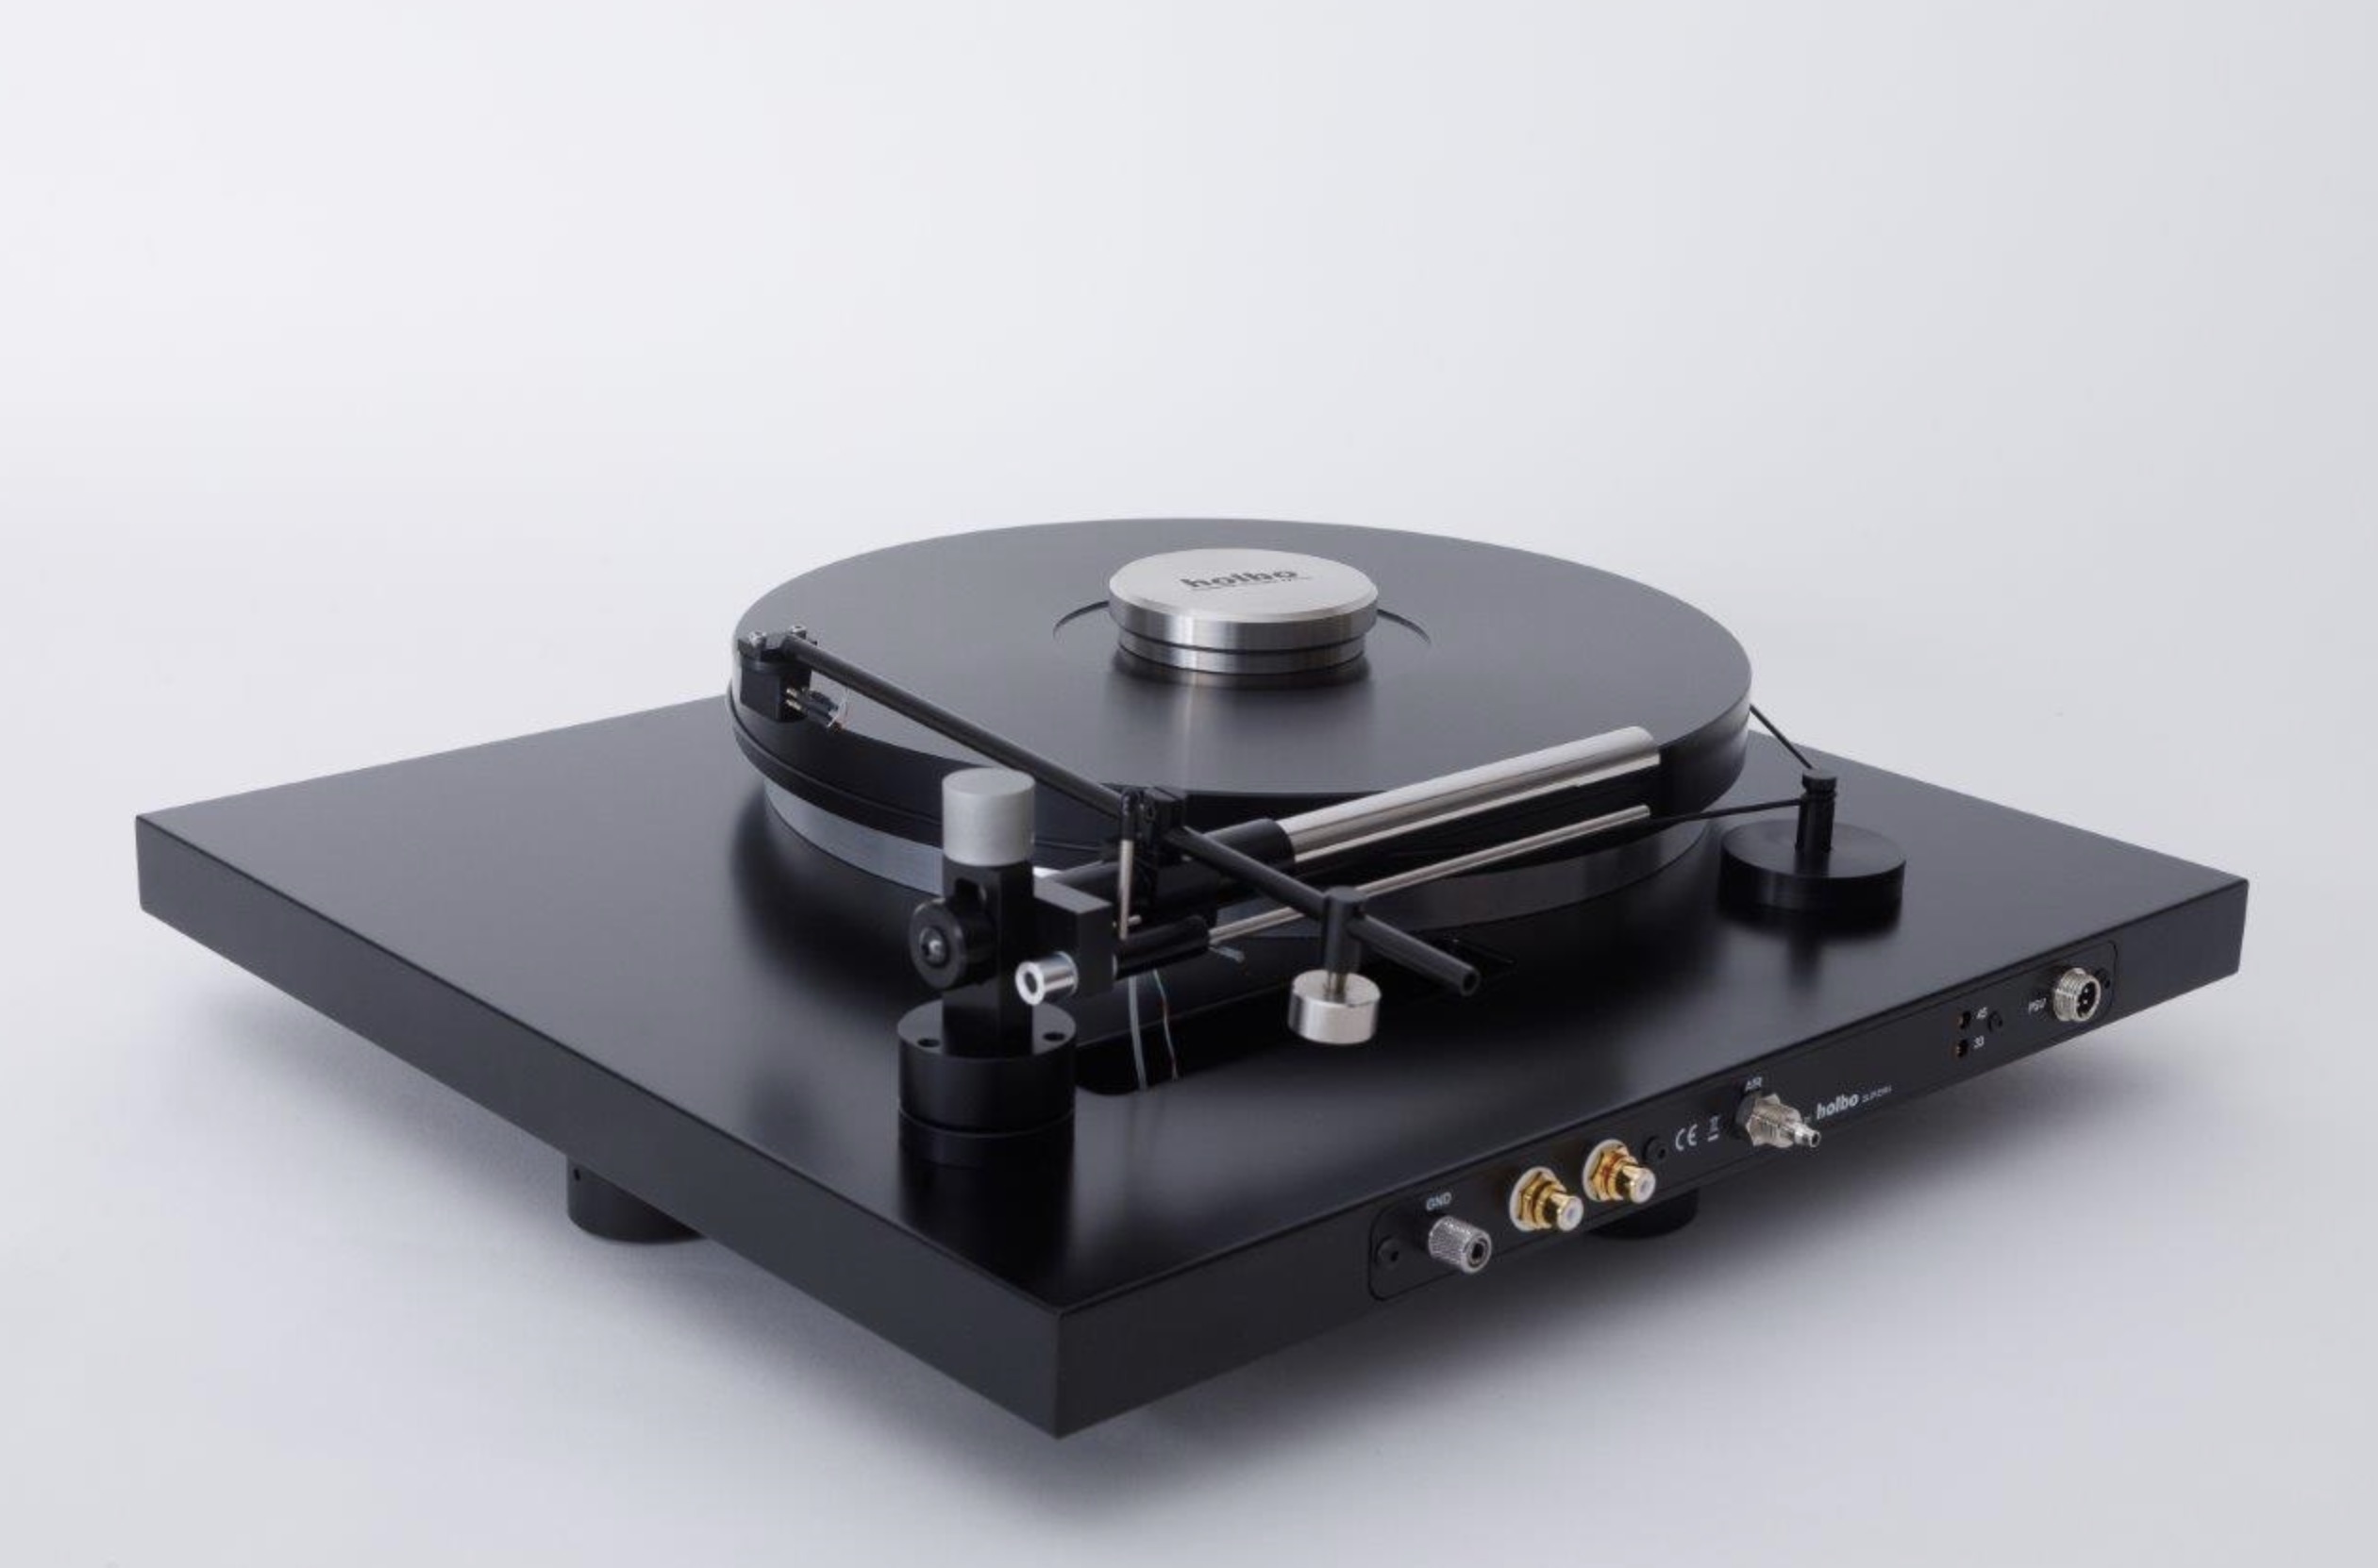 Holbo Airbearing Turntable at True Audiophile